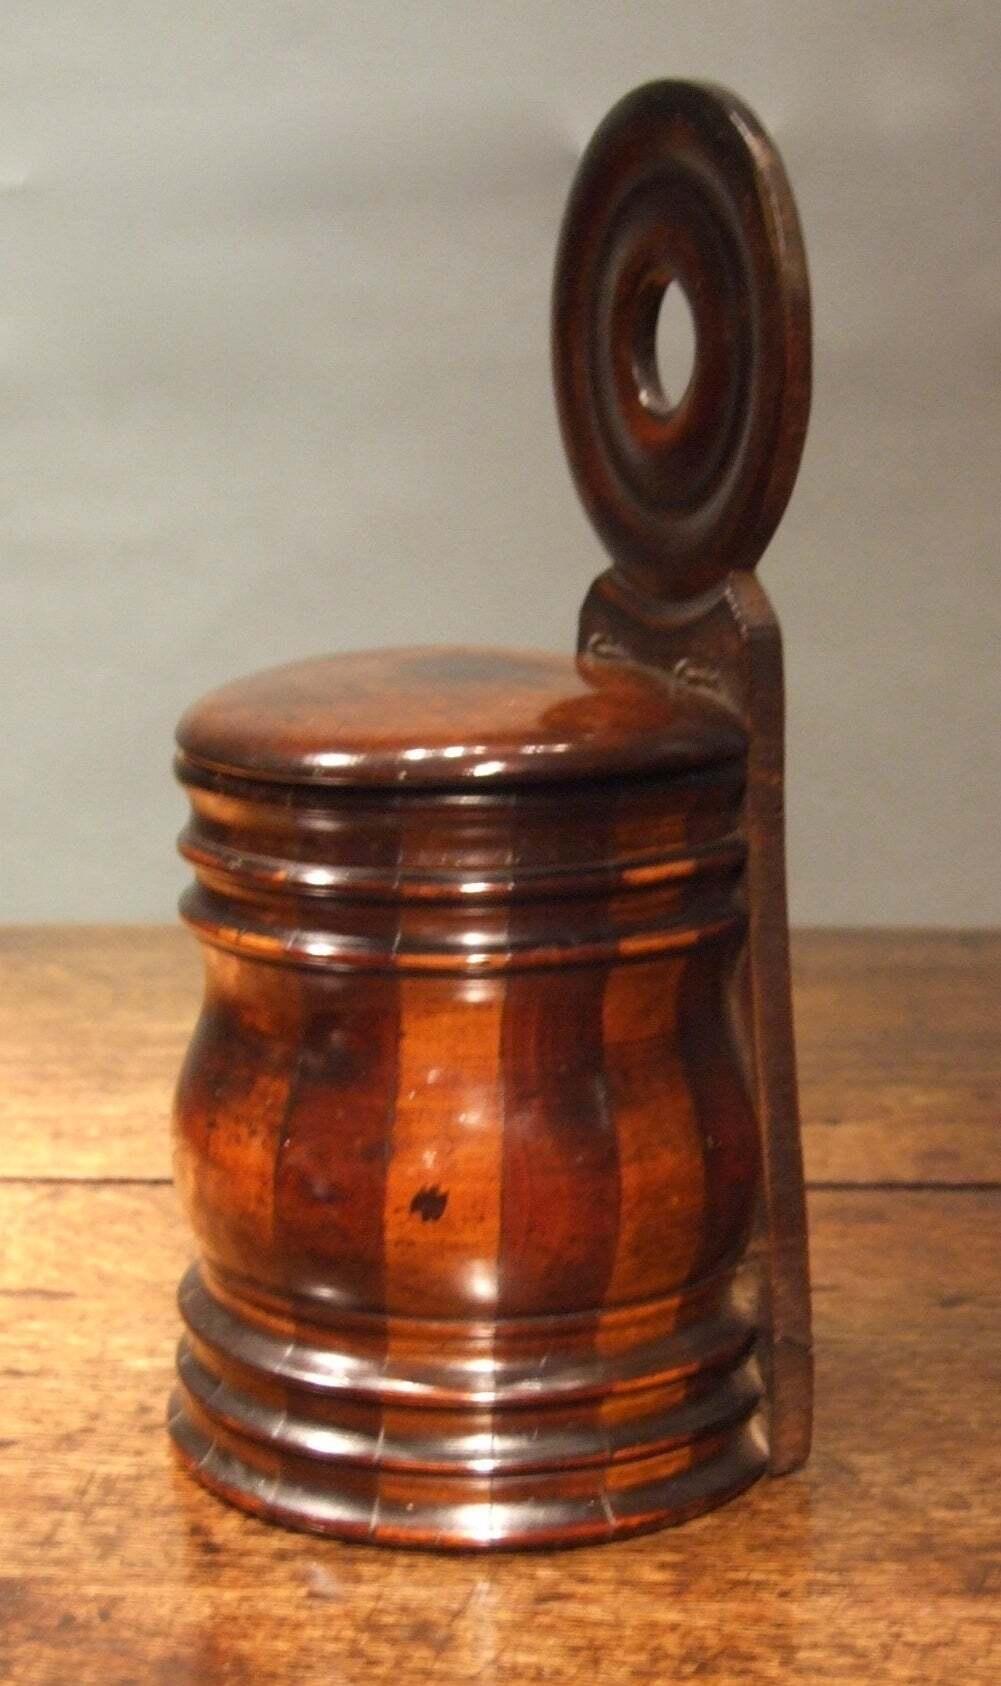 Good mid 19th Century turned wall mounted salt box, fashioned with alternating bands of sycamore and mahogany and having good crisp turned details and an exceptional patinated surface

Treen